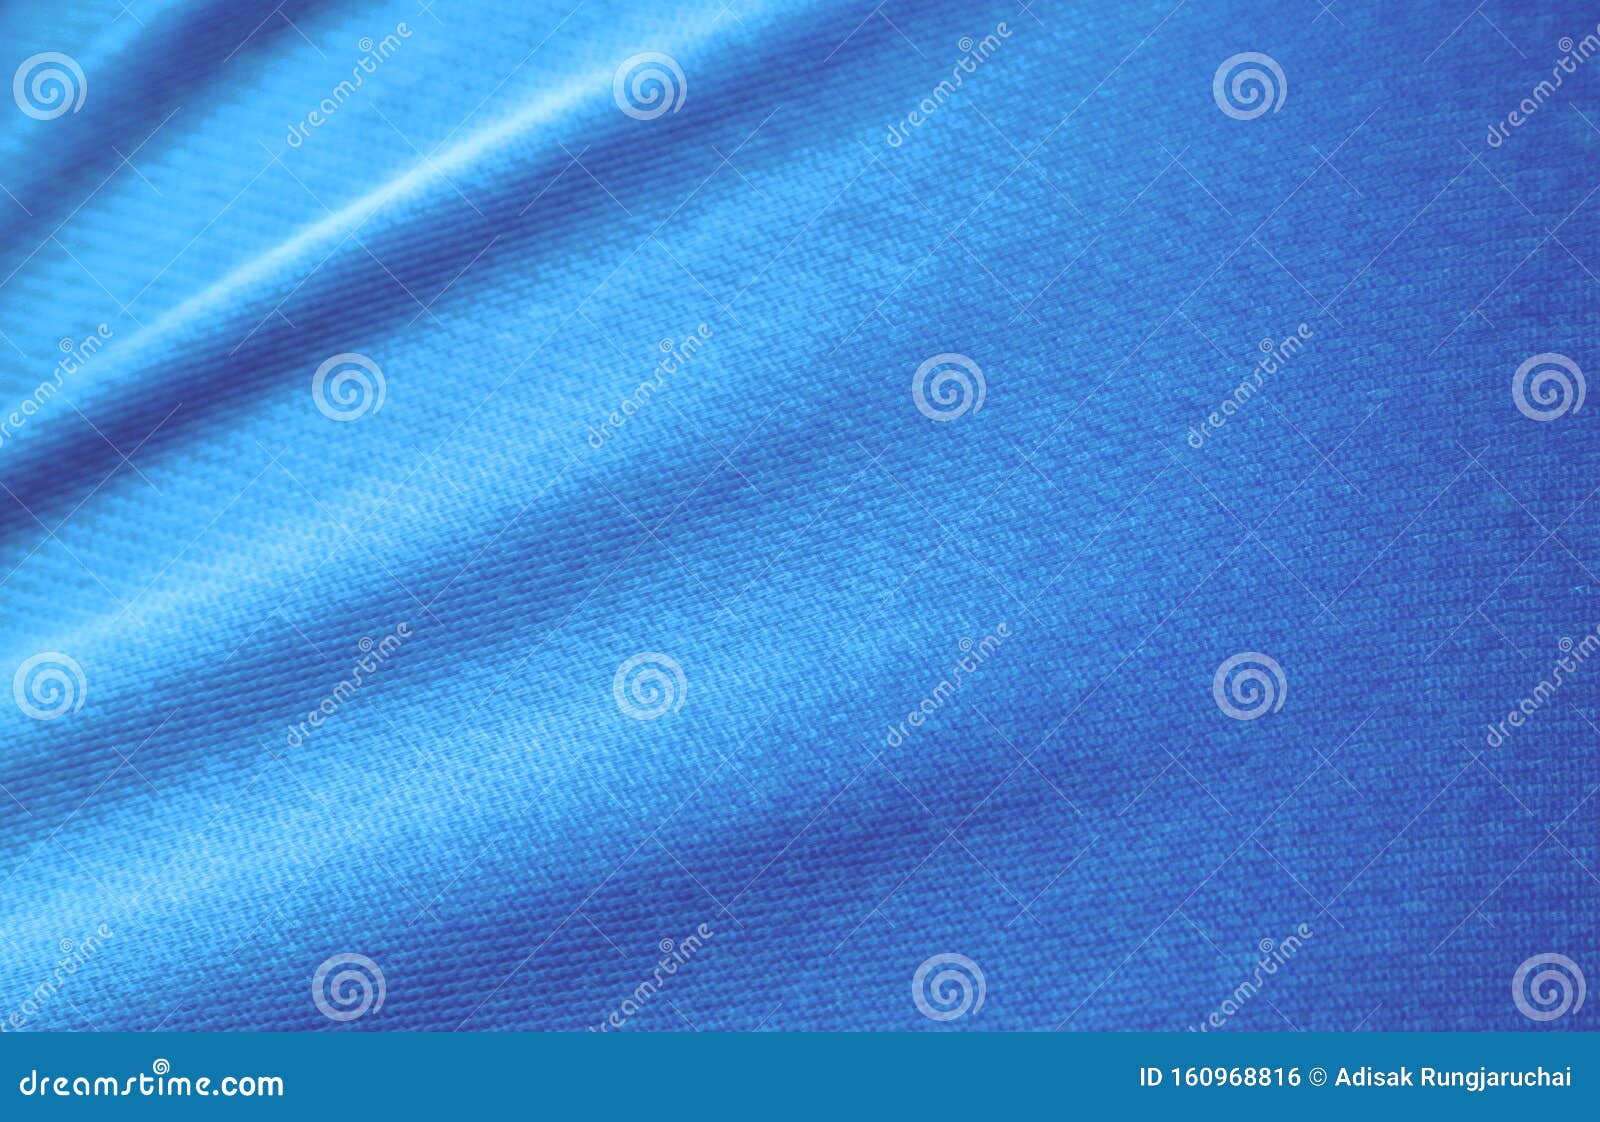 Blue Fabric Texture, Cloth Background, Solid Fabrics for Backs and ...